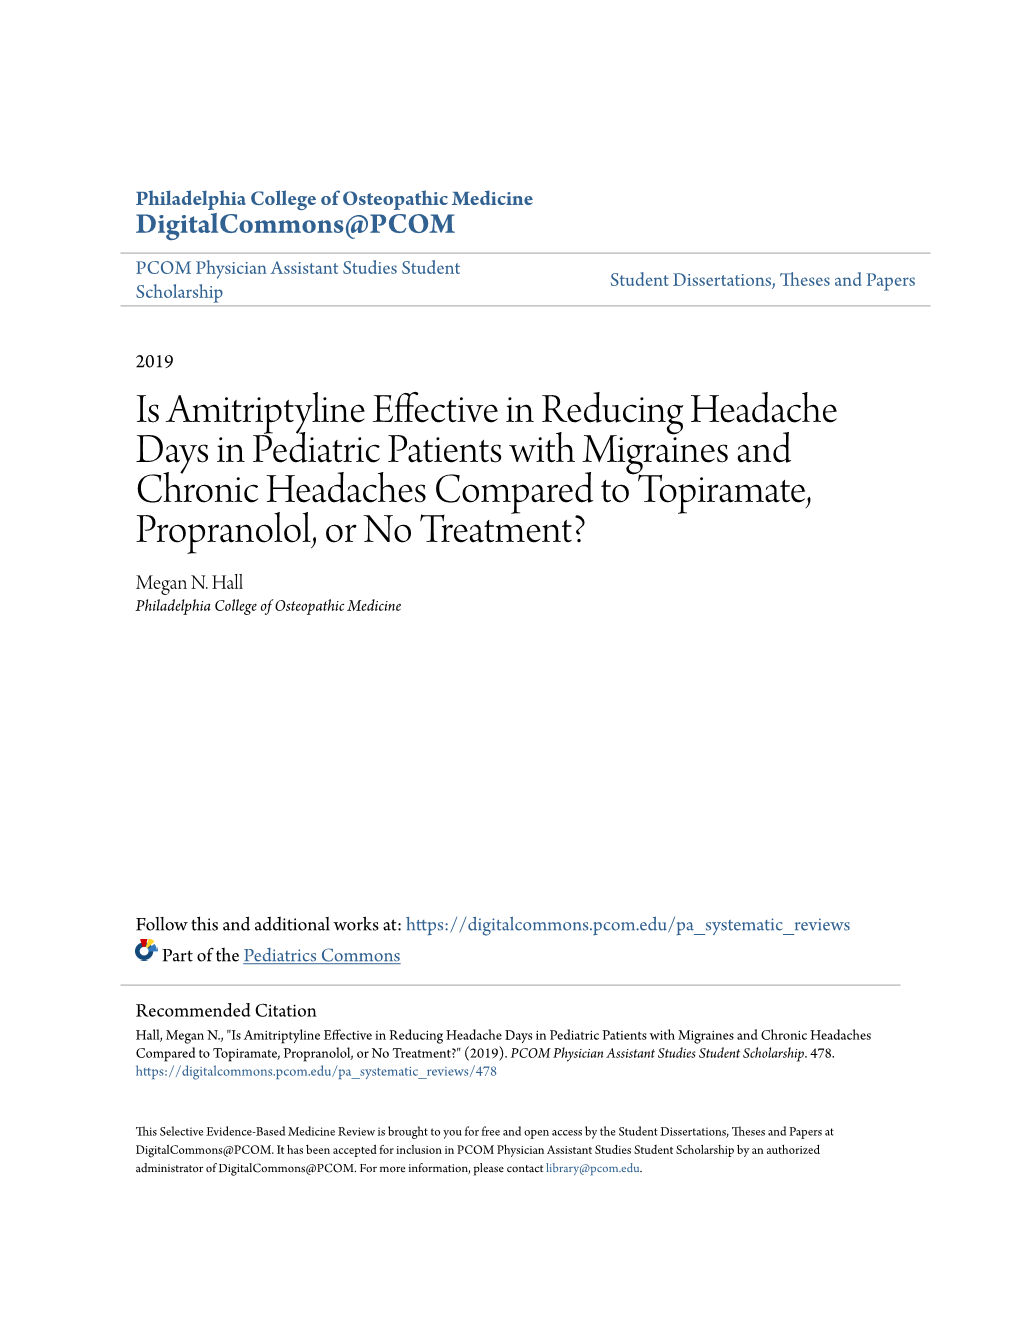 Is Amitriptyline Effective in Reducing Headache Days in Pediatric Patients with Migraines and Chronic Headaches Compared to Topi